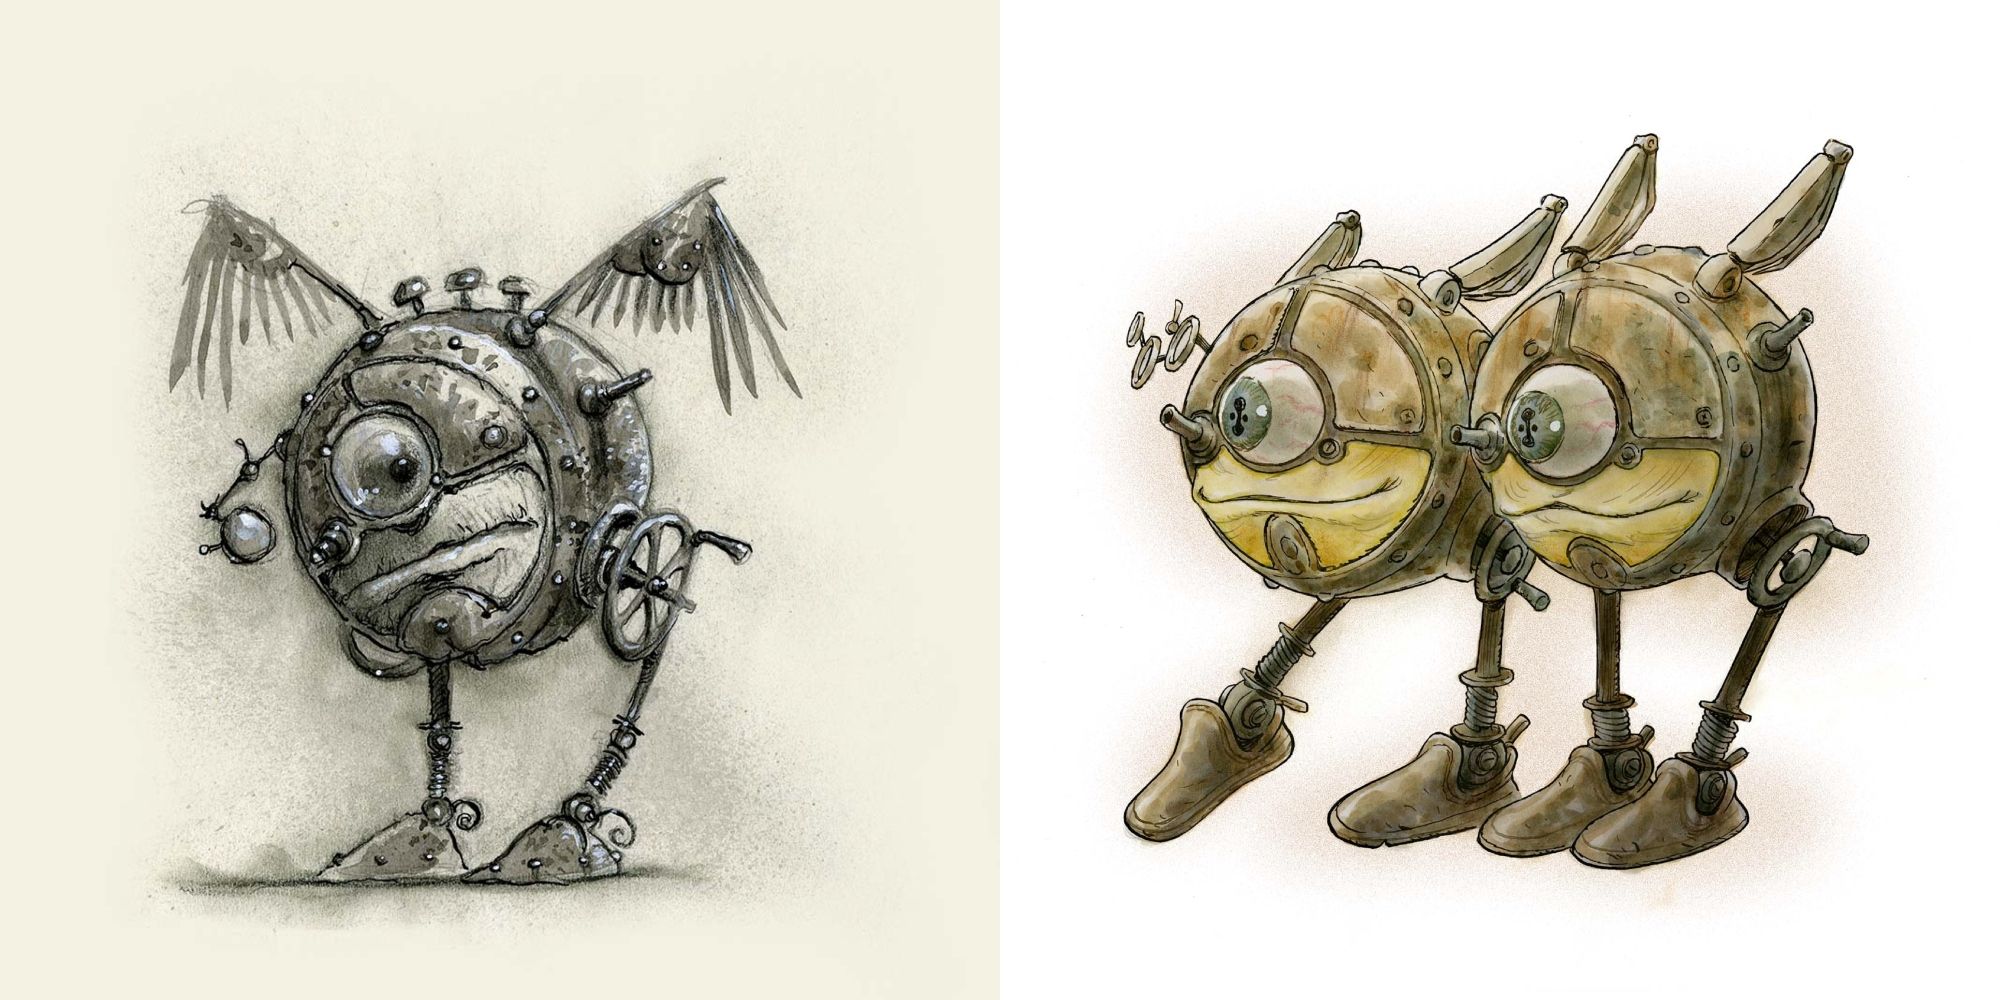 1994 and 2023 versions of modrons for DnD Planescape